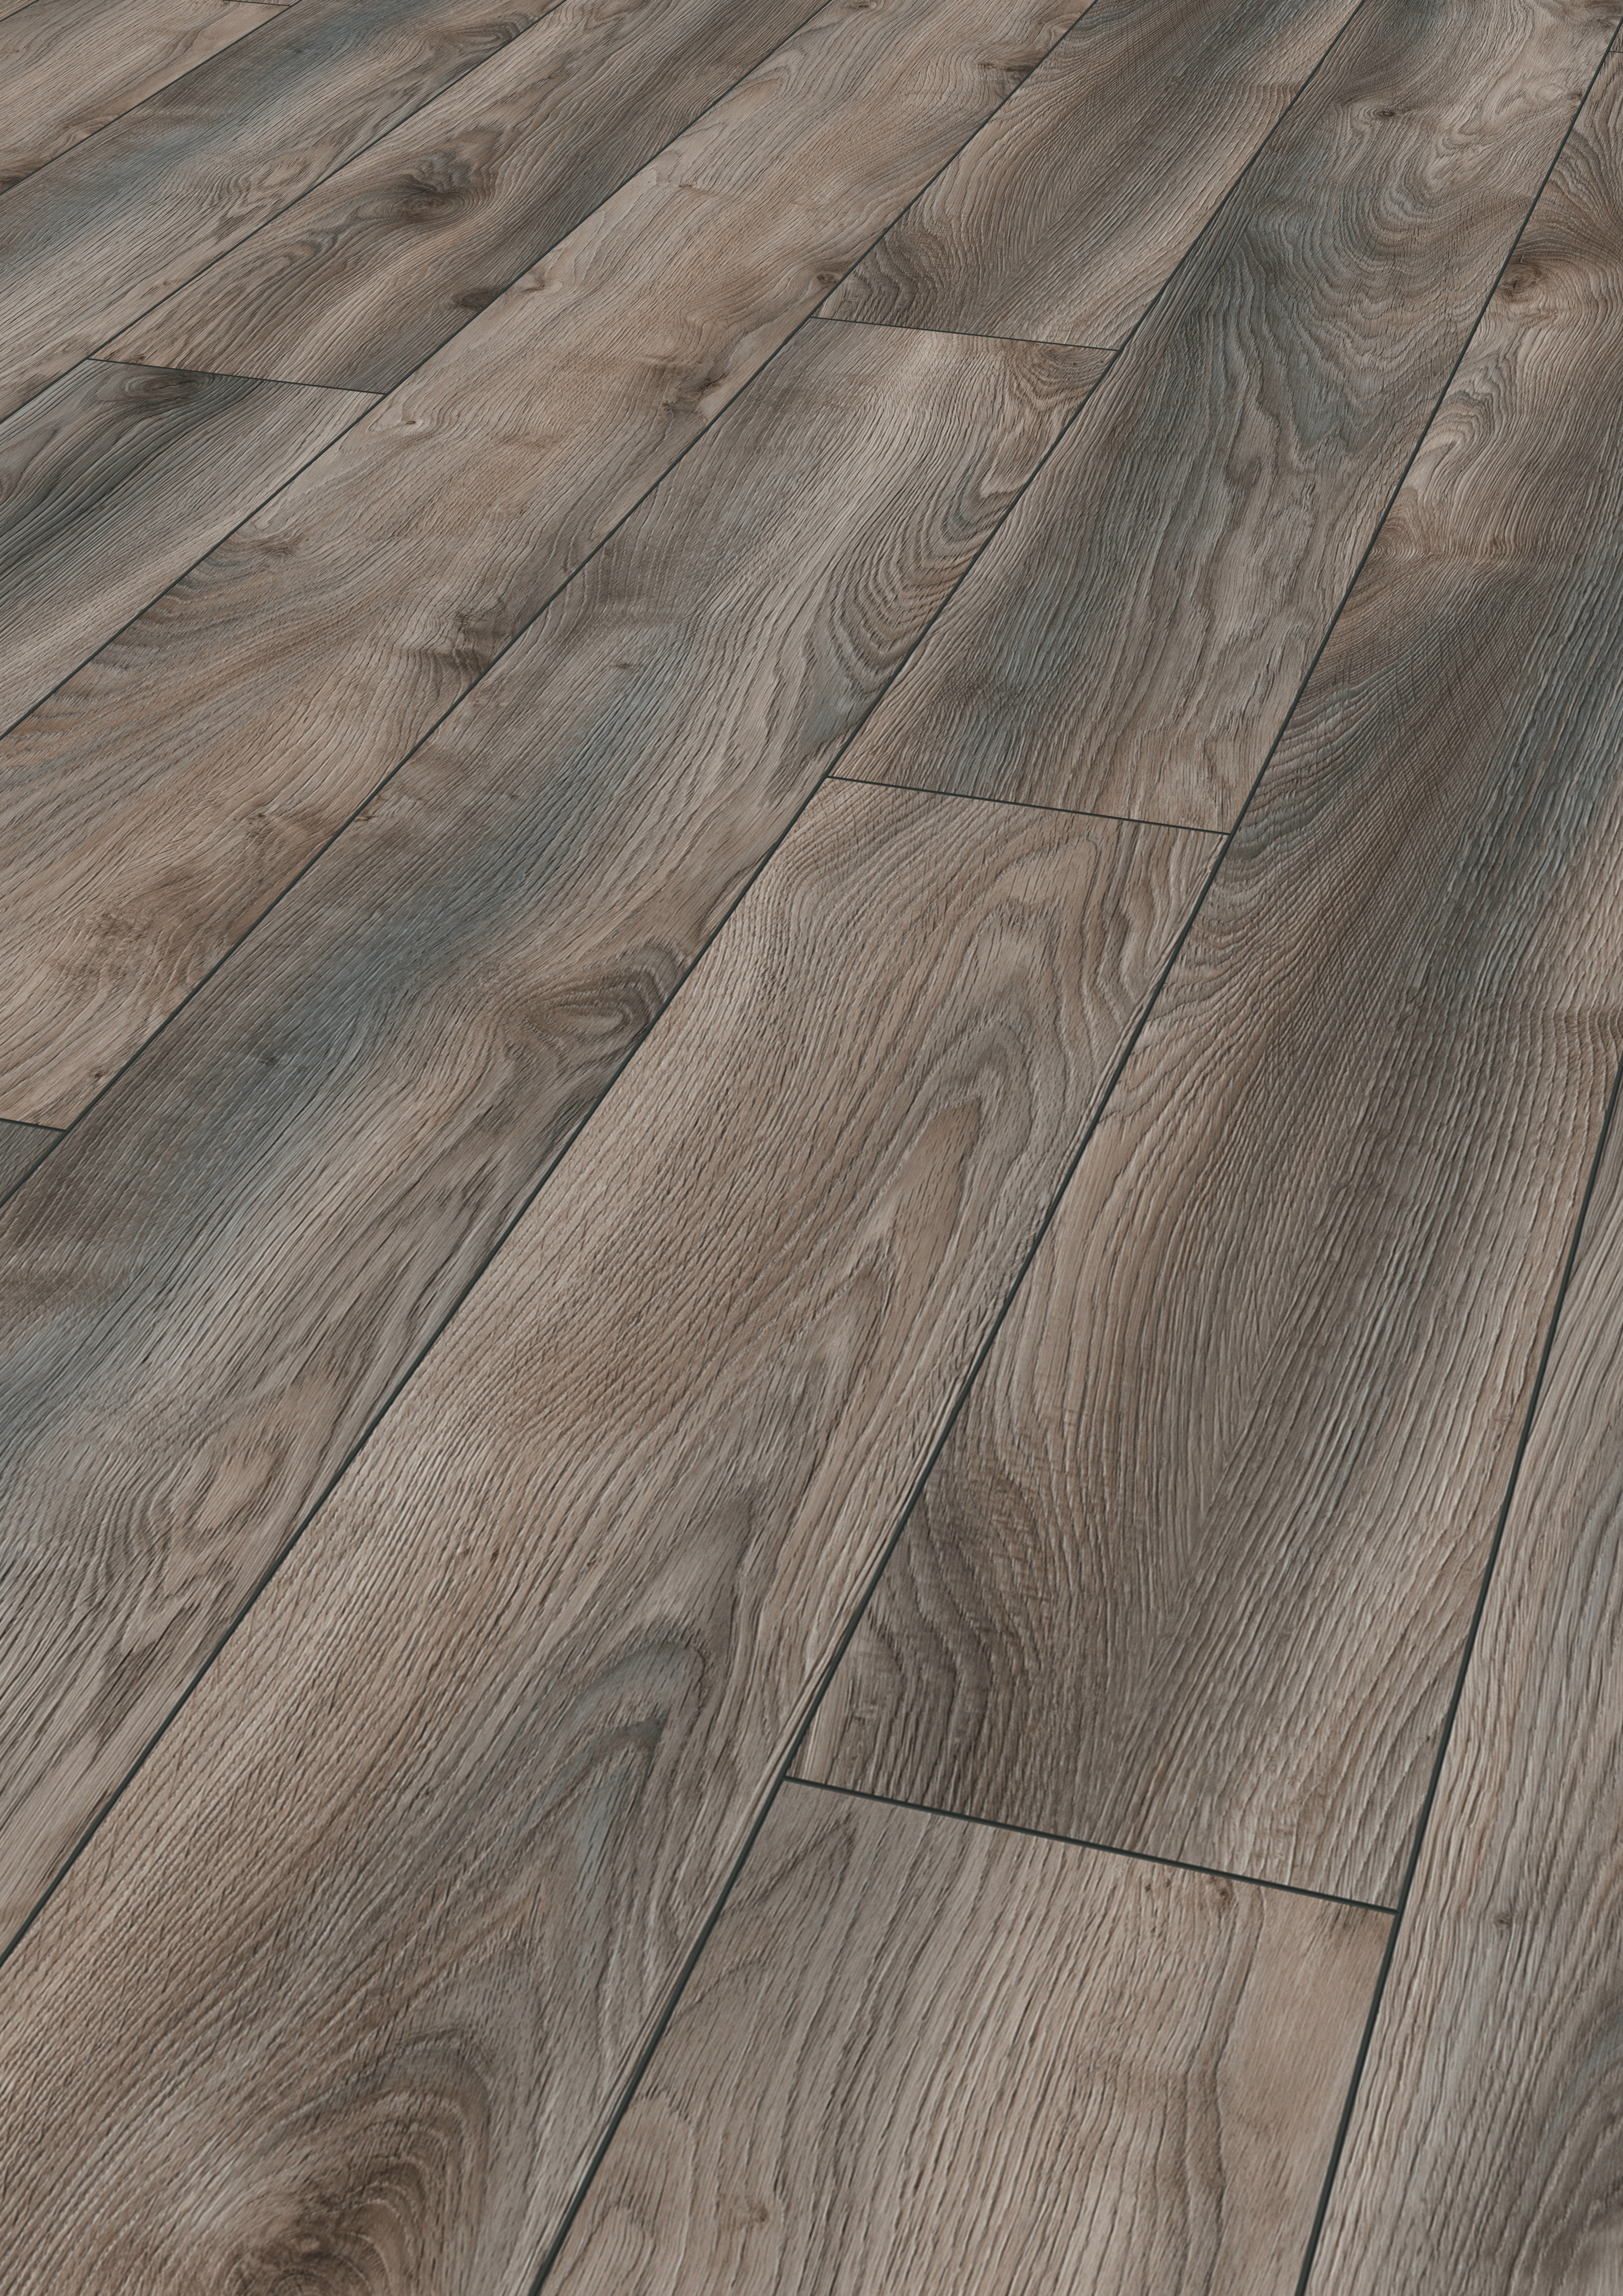 22 Amazing Hardwood Flooring On Concrete Floor 2024 free download hardwood flooring on concrete floor of mammut laminate flooring in country house plank style kronotex intended for download picture amp